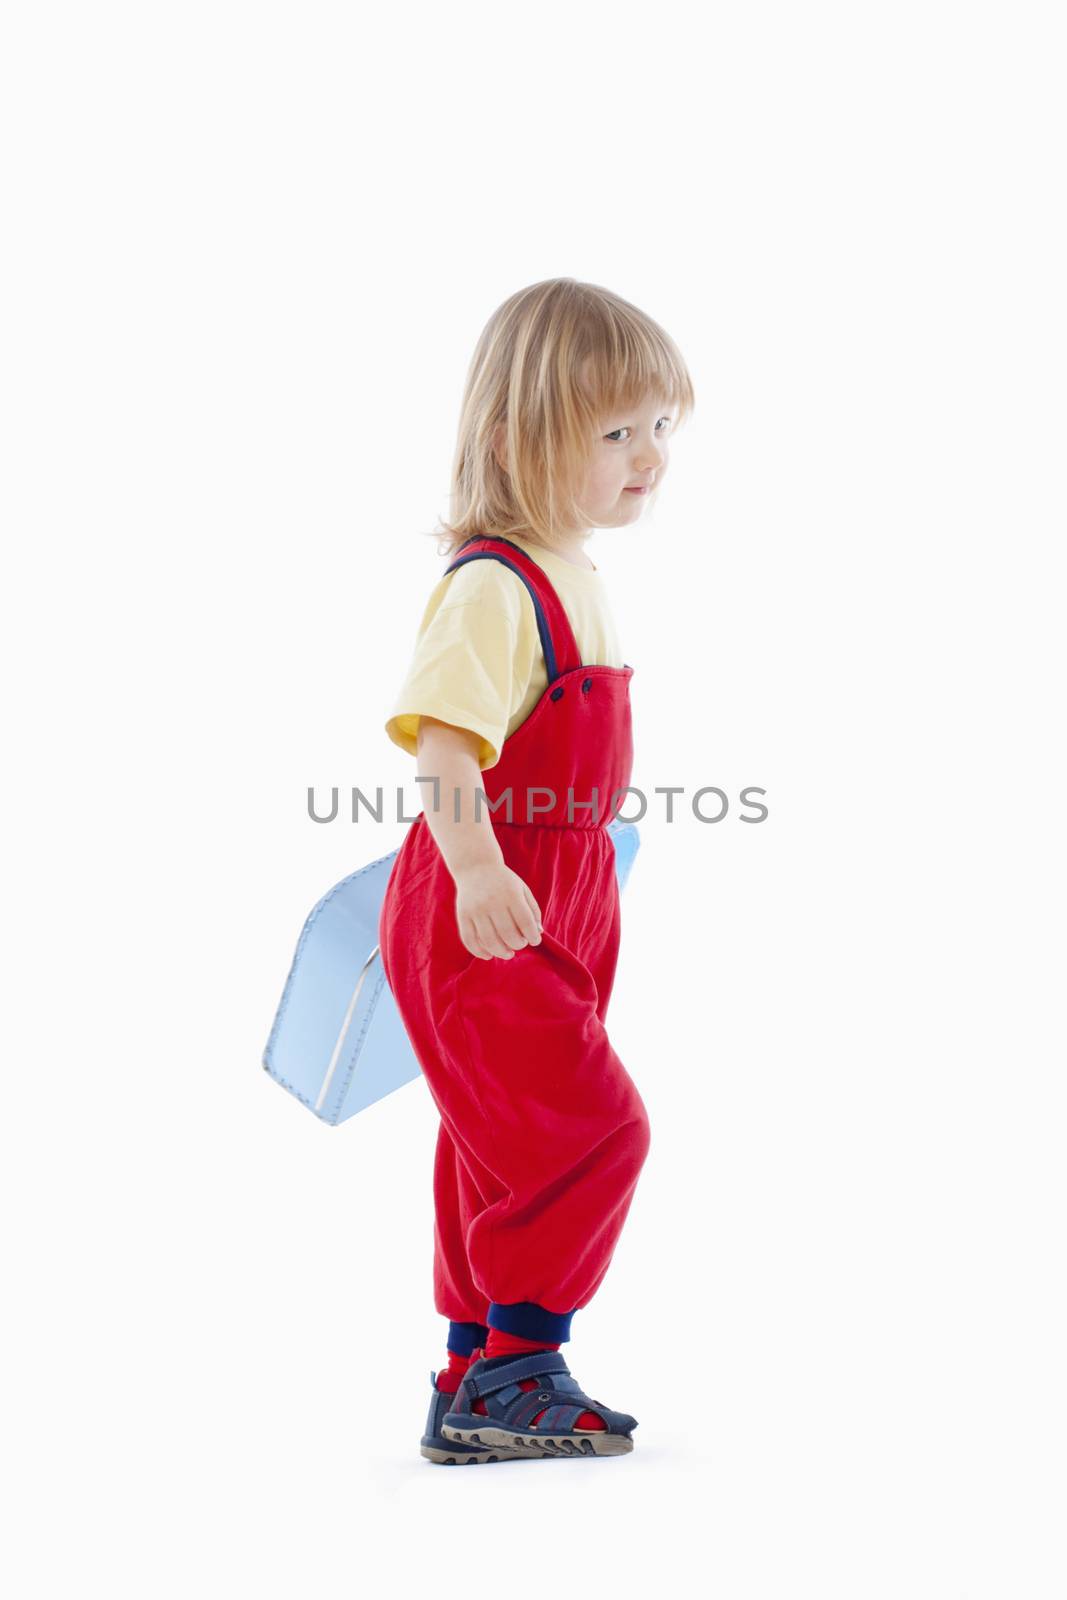 boy with long blond hair and suitcase isolated on white